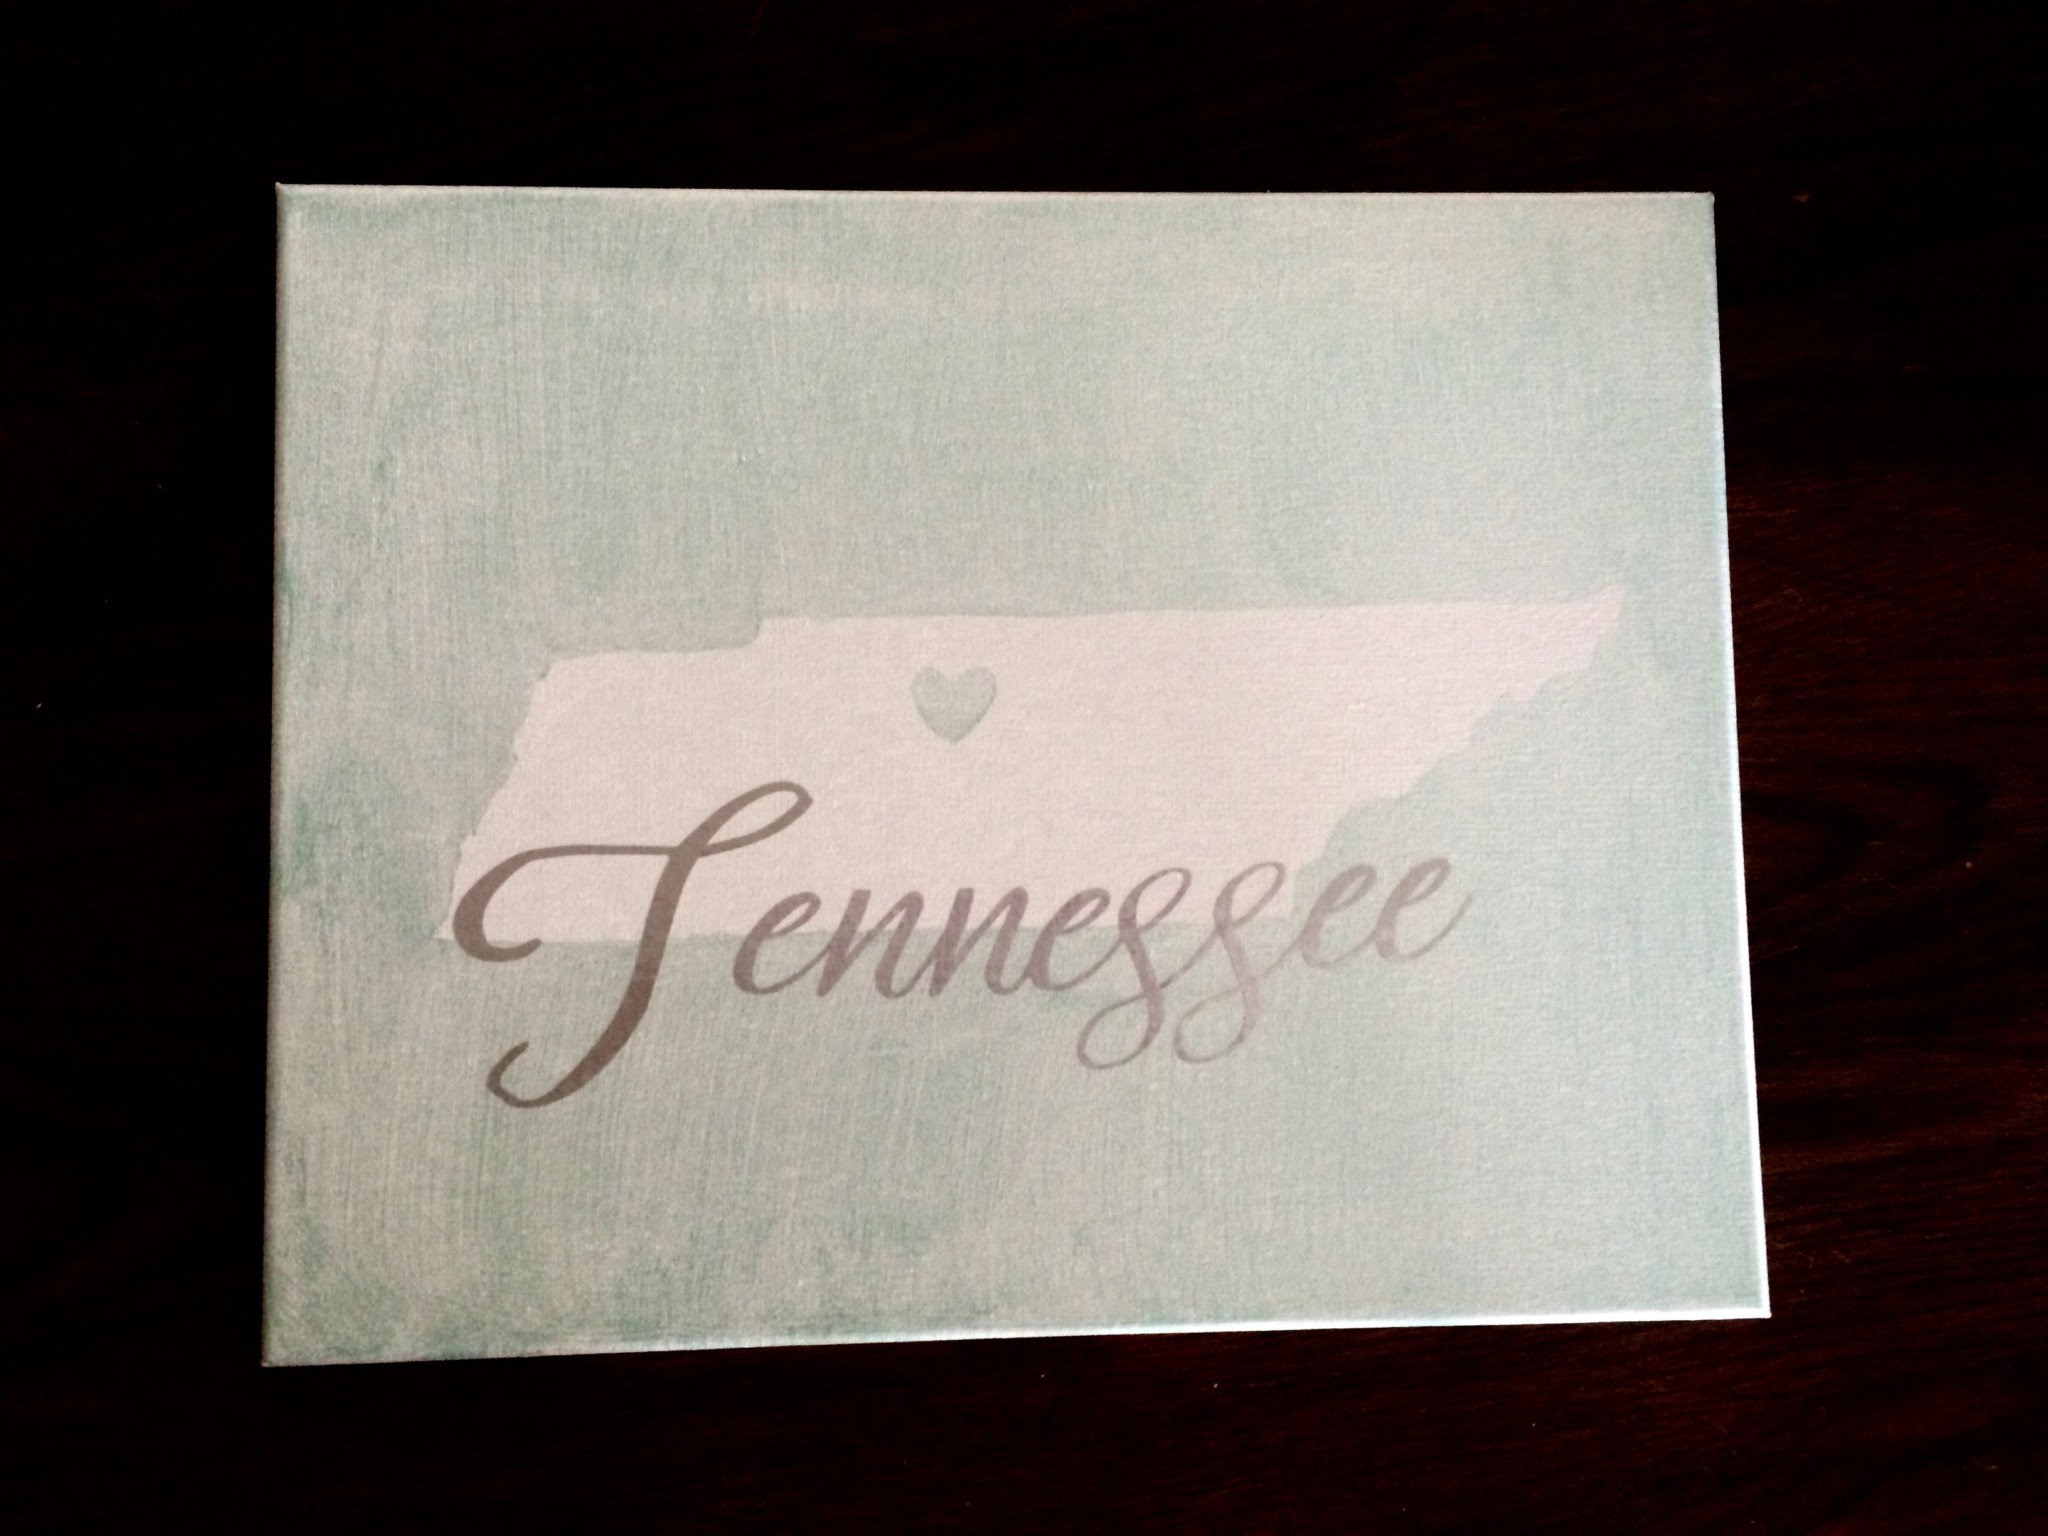 DIY Heart of Tennessee Wall Art with Cricut